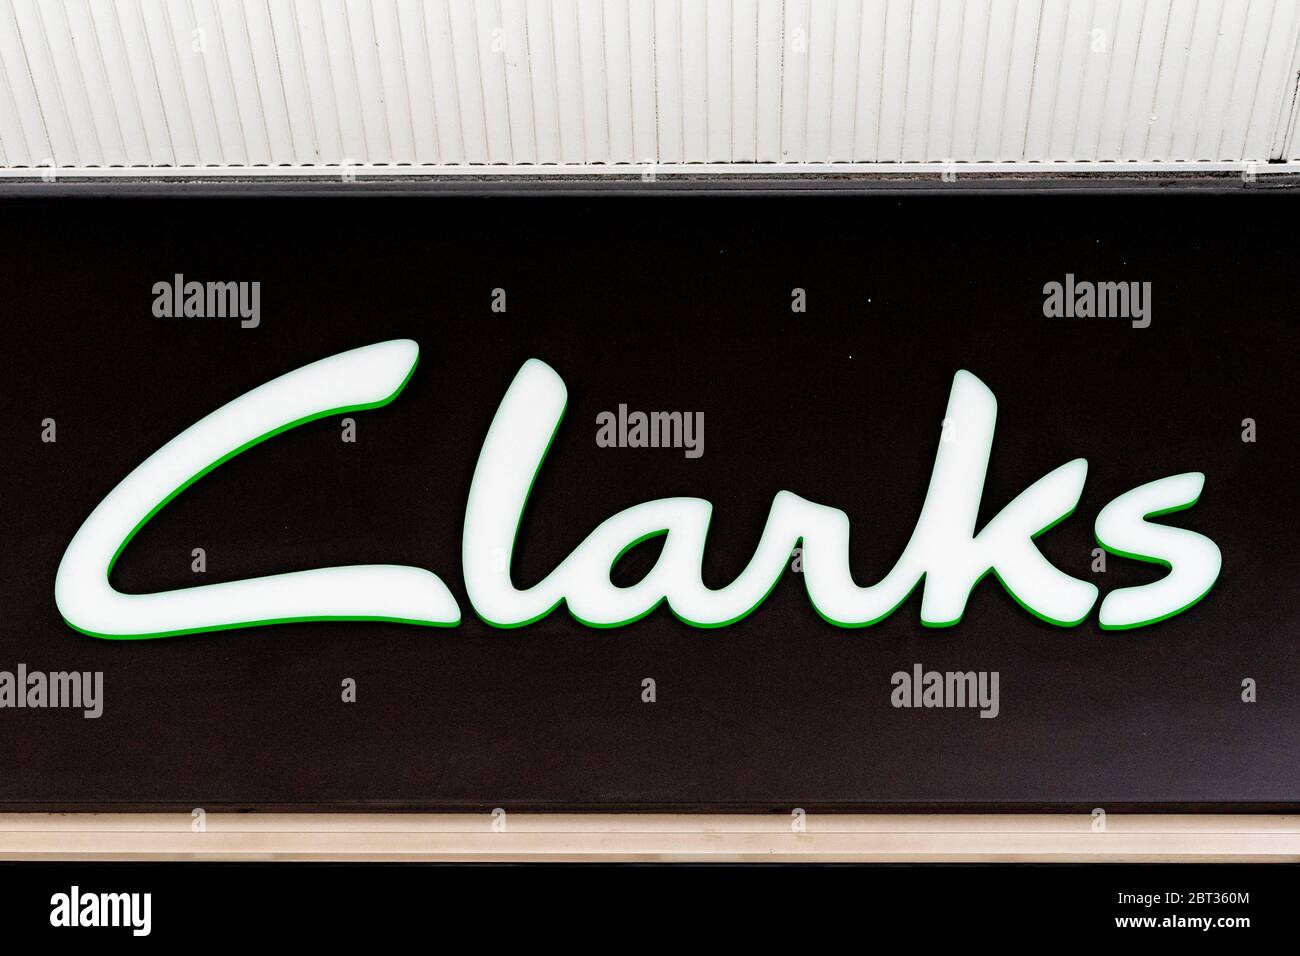 Page 2 - Clarks Logo High Resolution Stock Photography and Images - Alamy